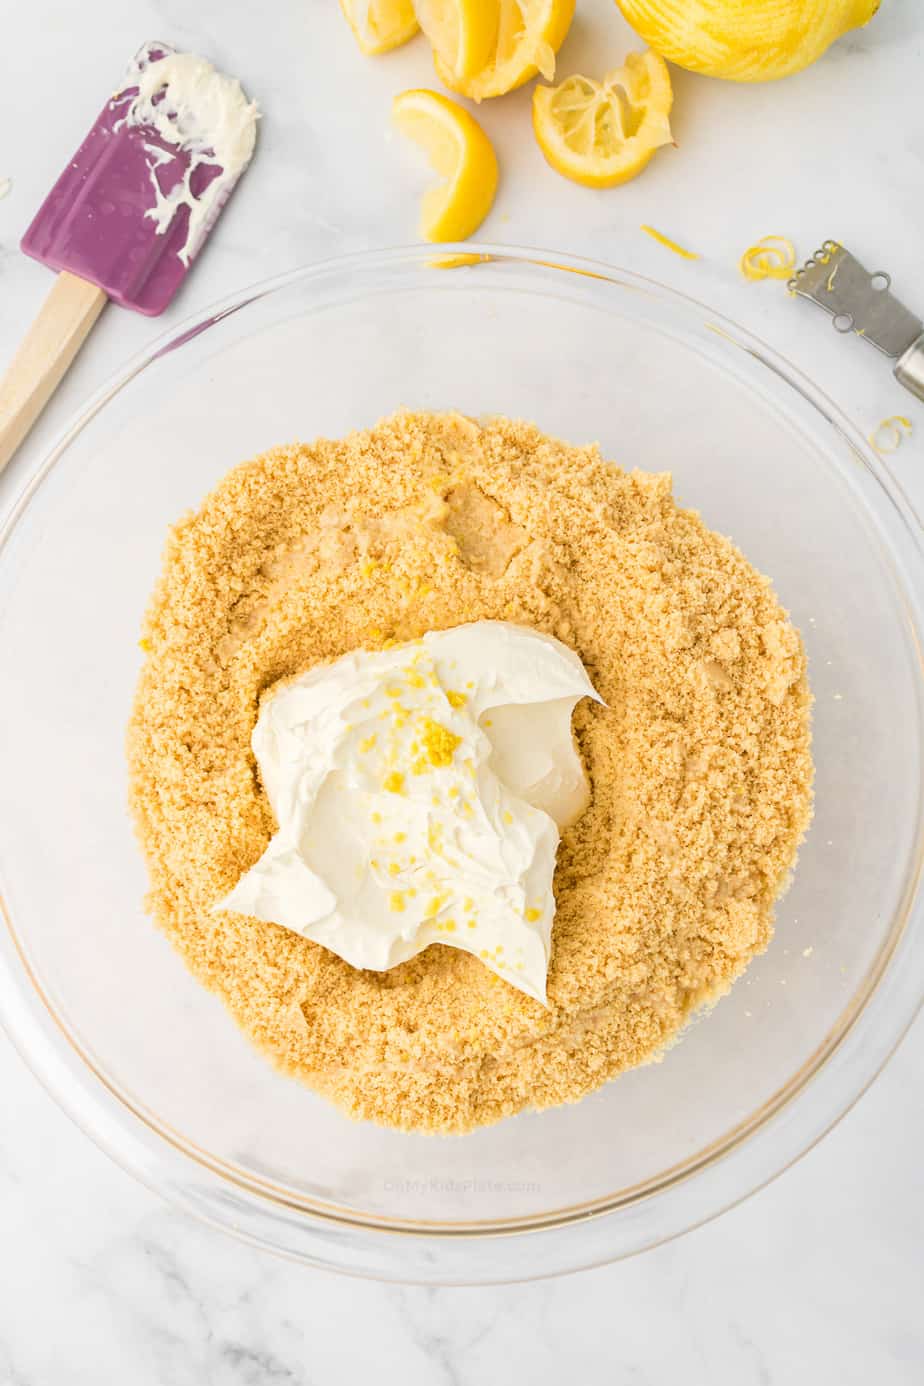 Cream cheese and lemon zest added to cookie crumbs